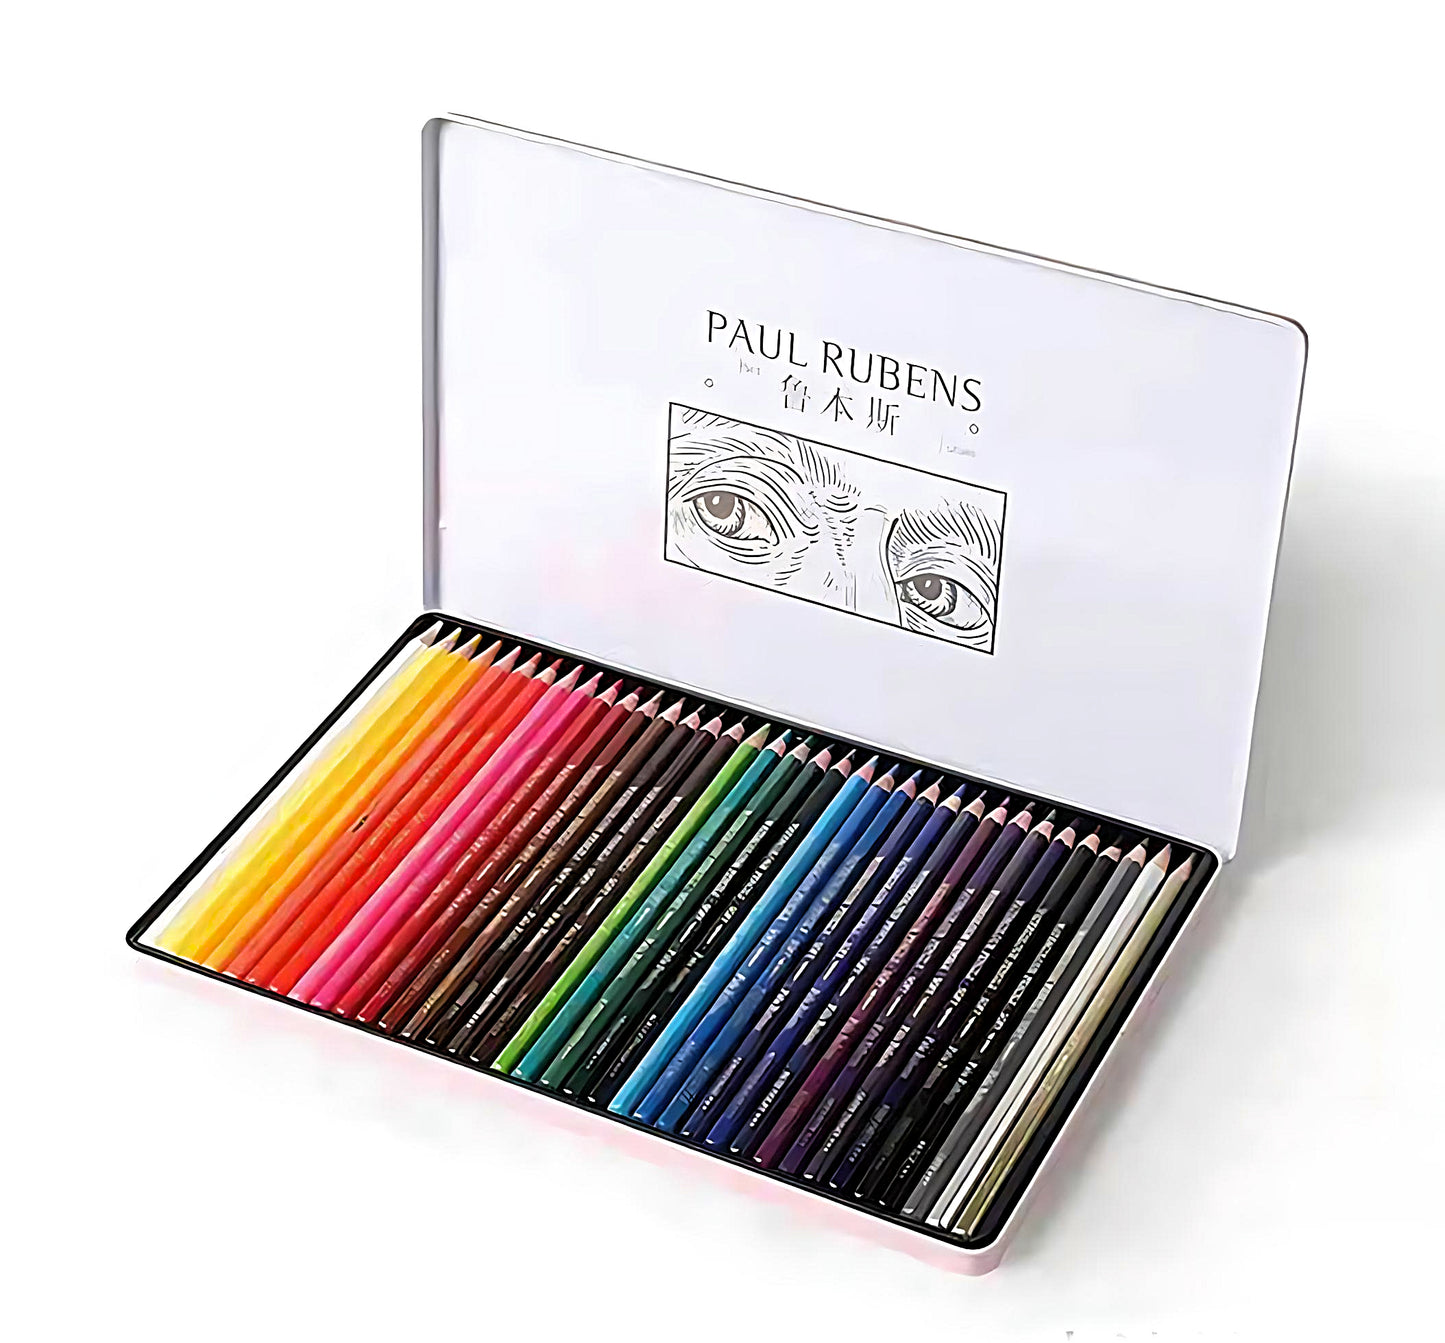 a set of 36 Paul Rubens watercolor pencils in a pink tin box